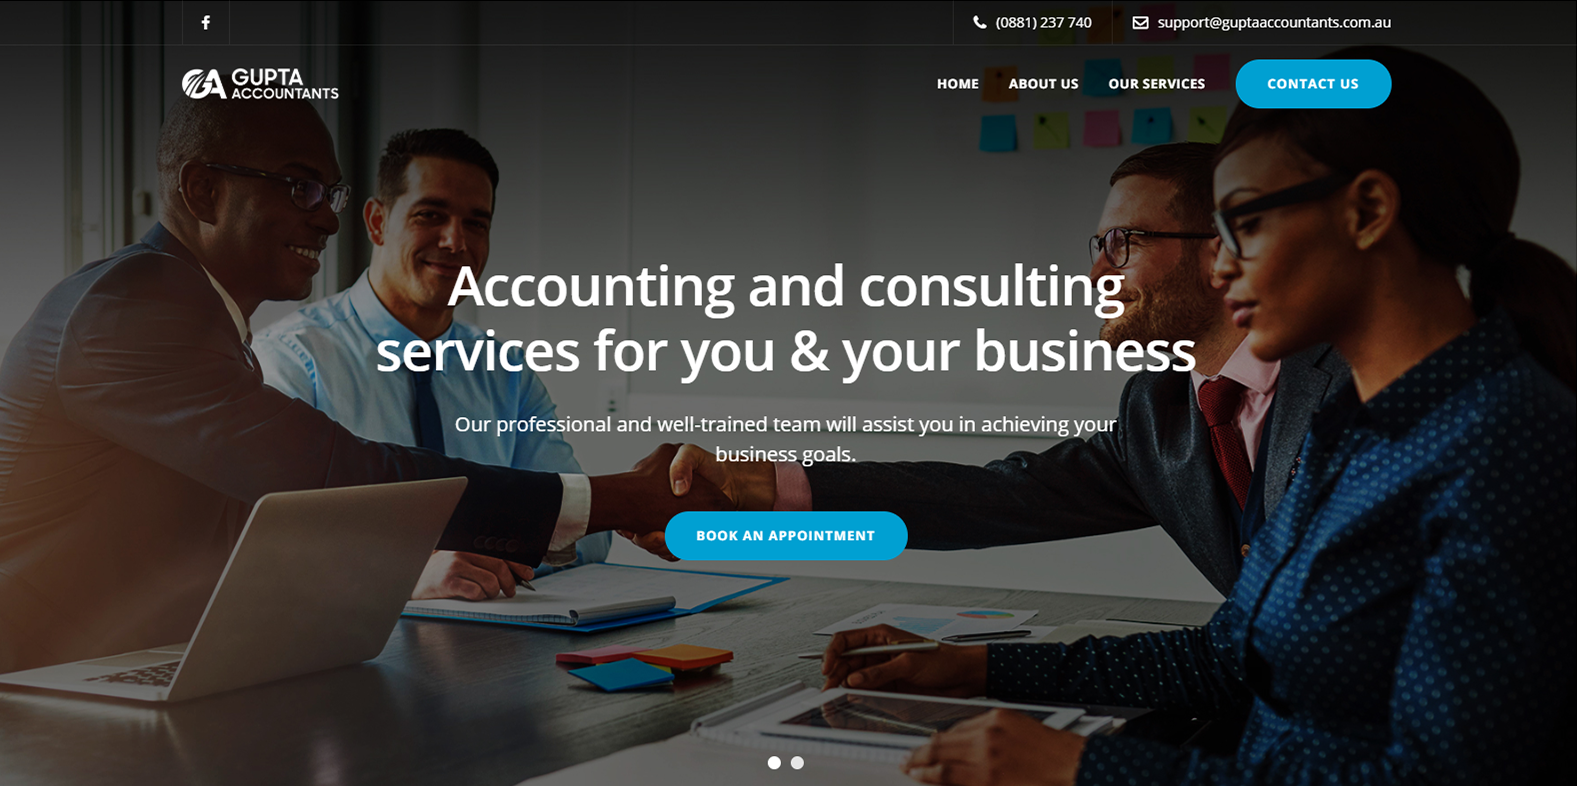 Gupta Accountants (Accounting &Consulting Services Adelaide)